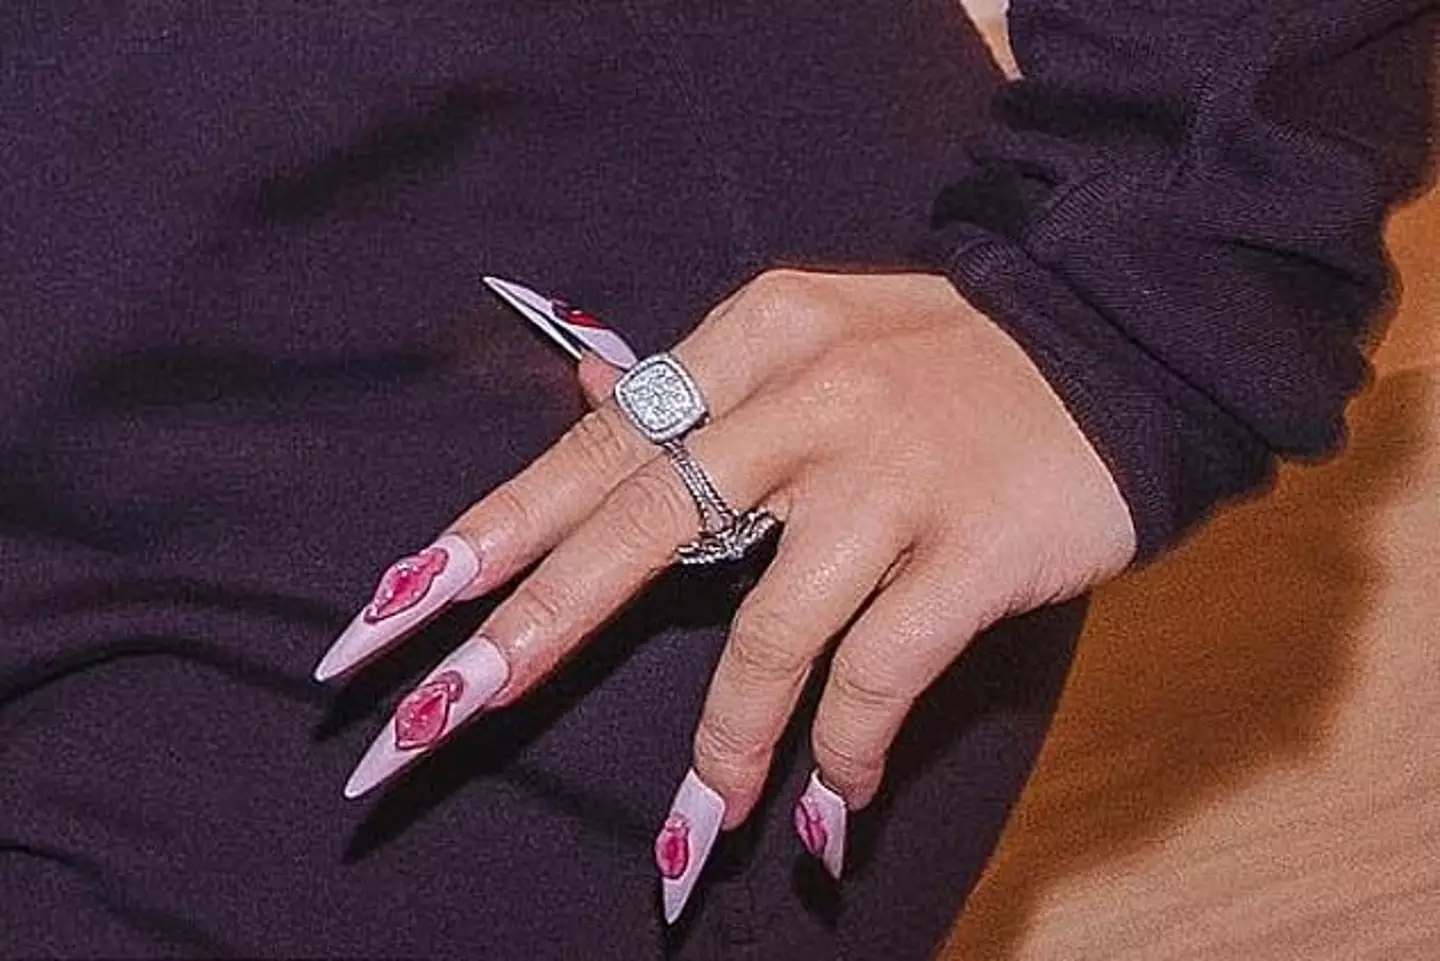 The singer was simultaneously rocking 'vagina' artwork on her long nails.